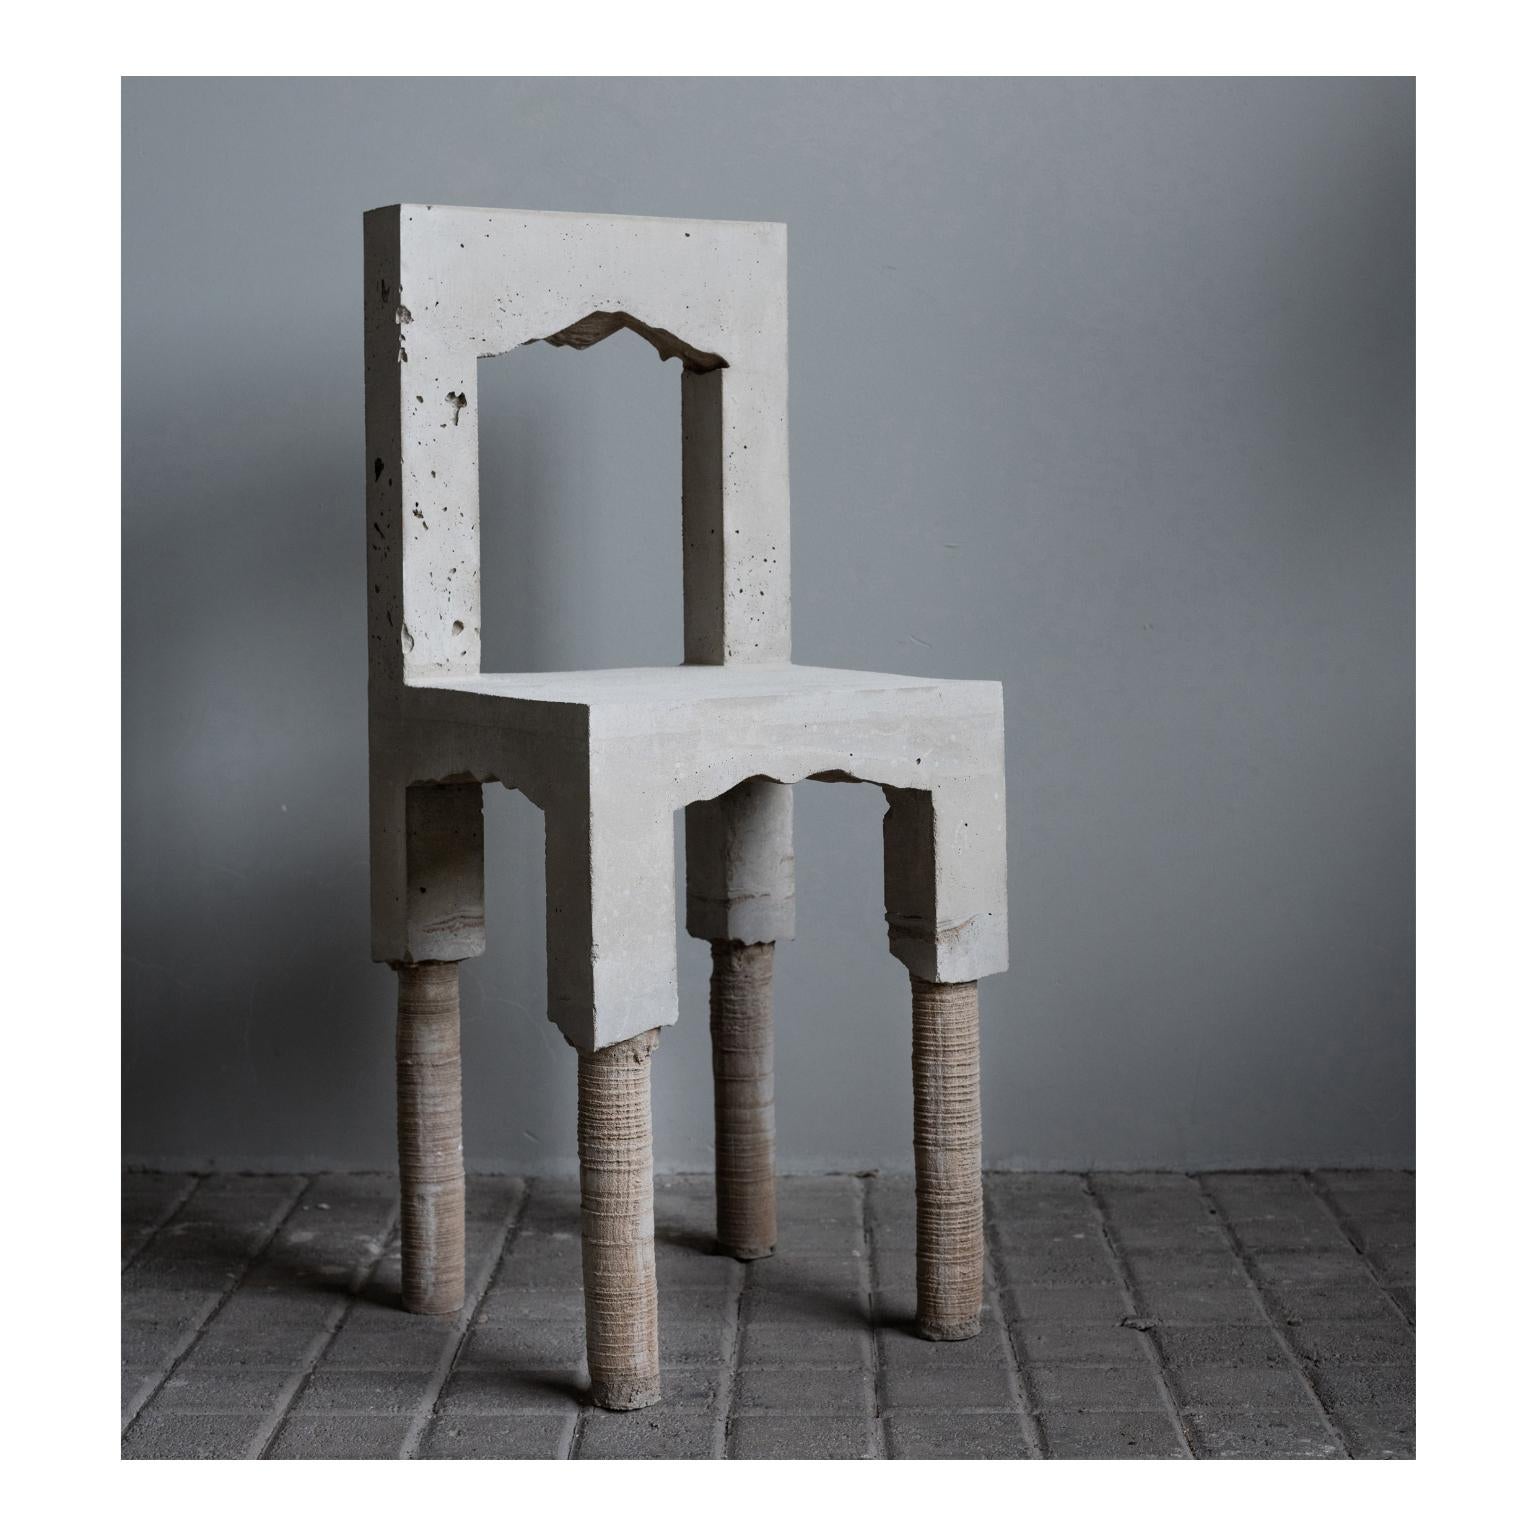 Geomorphic chair by Christian Zahr
Dimensions: W 38 x D 38 x H 80 cm
Materials: Cement- Sand- Water- Time.

Each piece is handmade.

Geomorphic Archeology: Unearthing the Ephemeral - Indoor primitive landscapes (furniture and objects). Sand